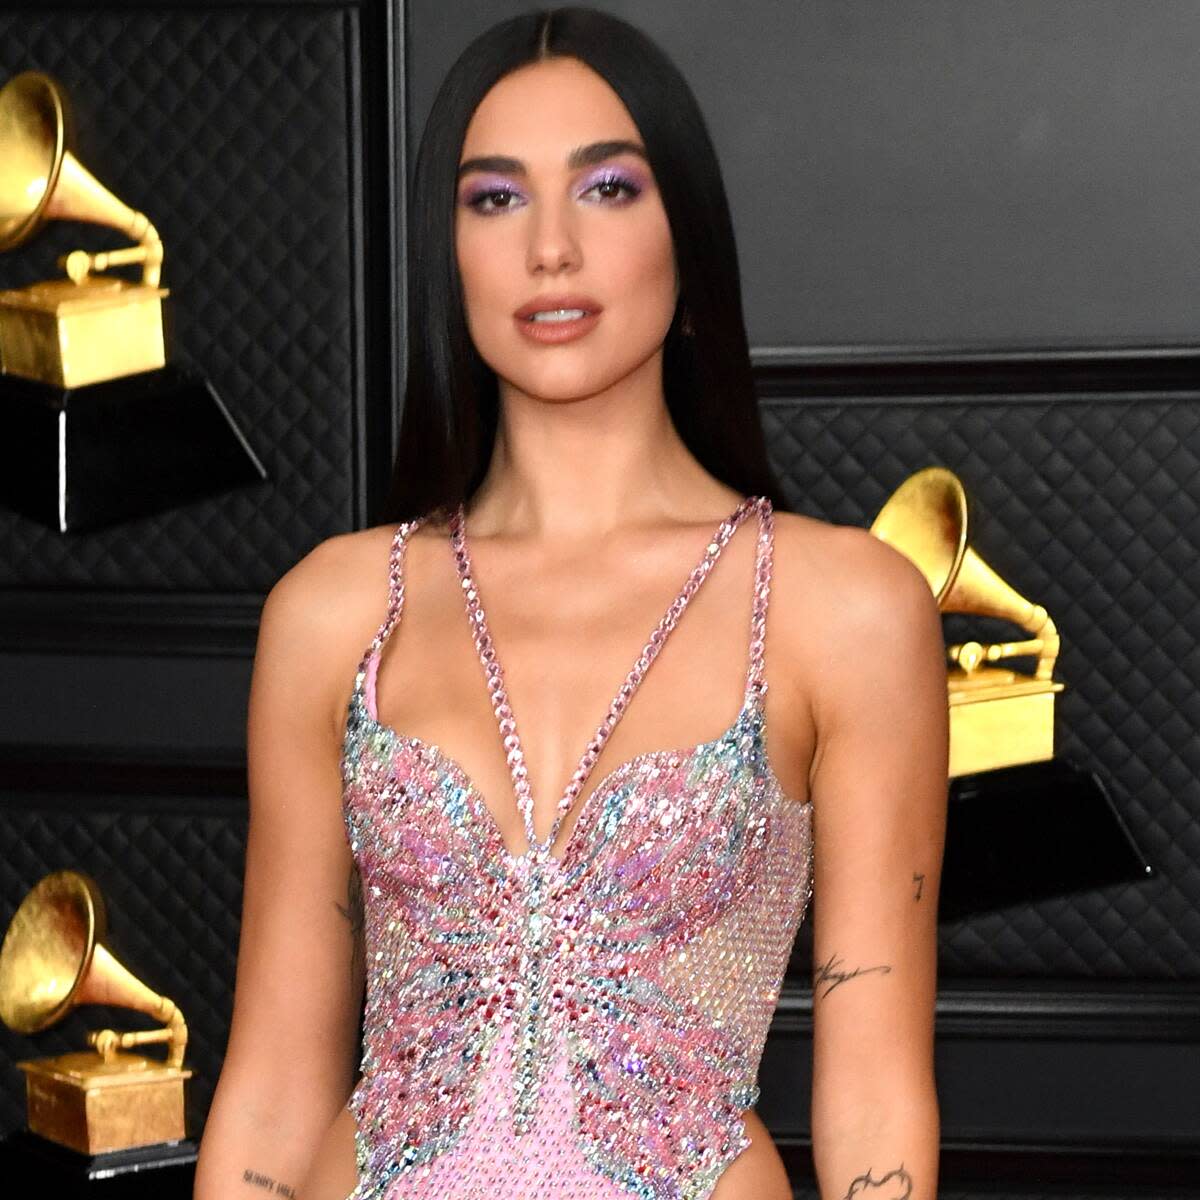 Dua Lipa's Stunning Dress Gives the Butterfly Effect a Whole New